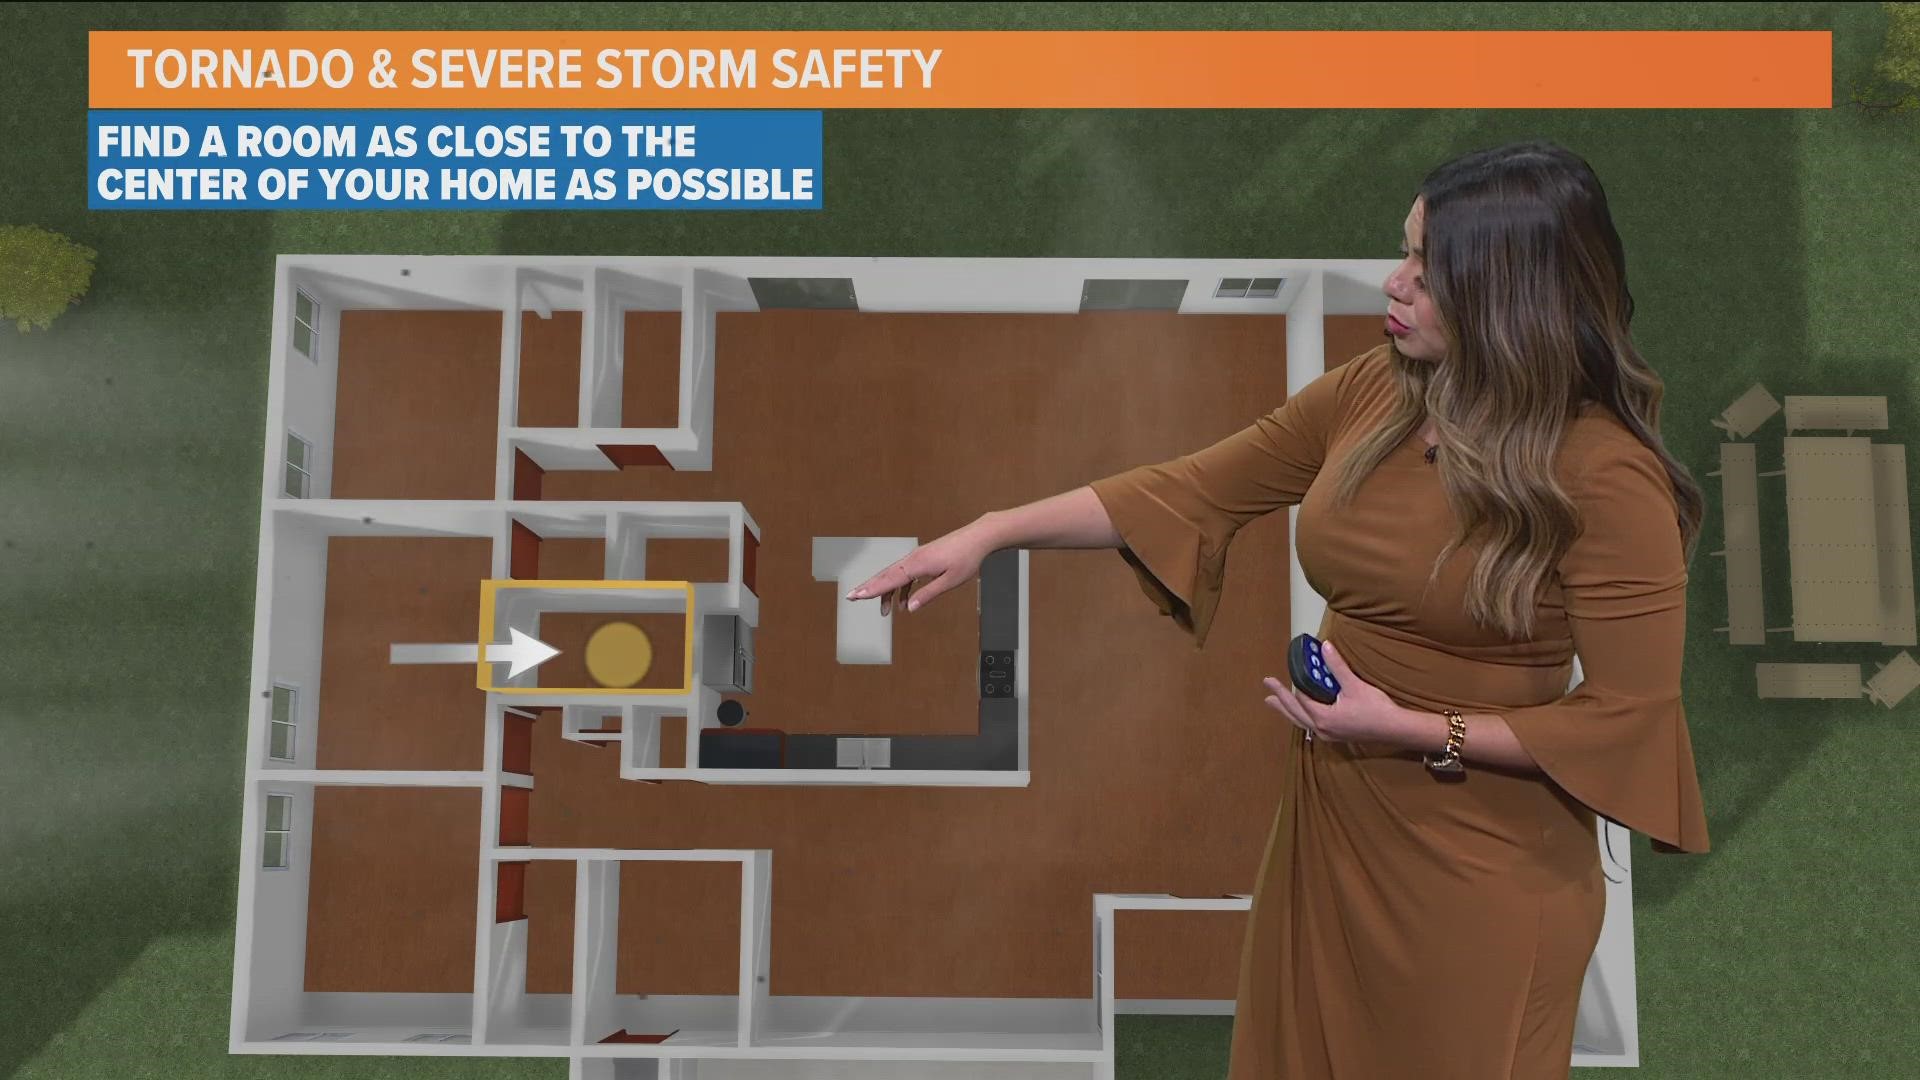 WFAA meteorologist Mariel Ruiz has advice for what to do before and during severe weather in North Texas.